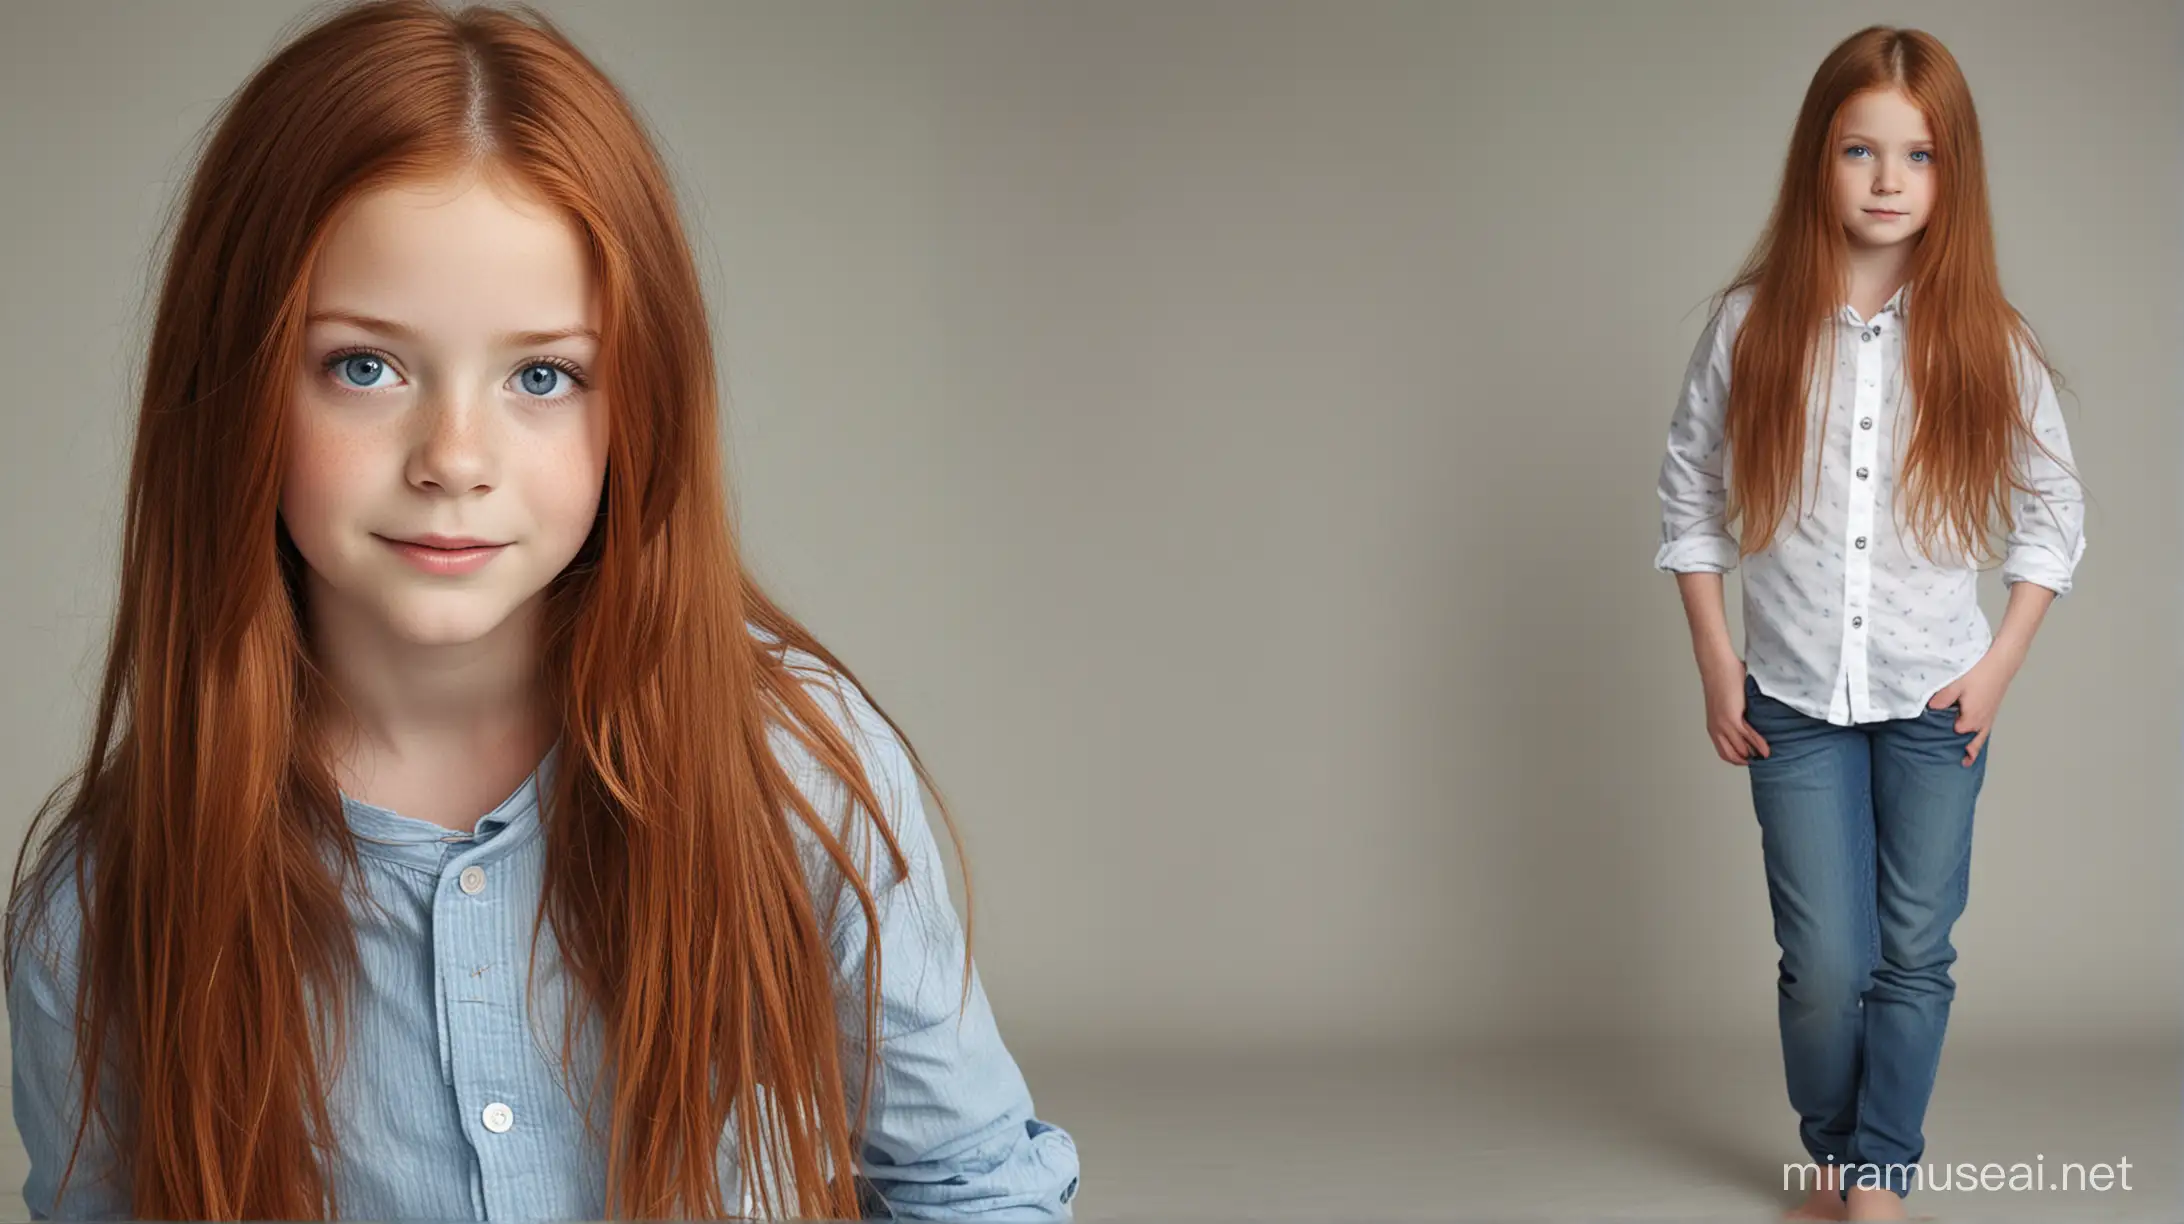 Adorable 10YearOld Girl with Long Red Hair and Blue Eyes in Stylish Outfit